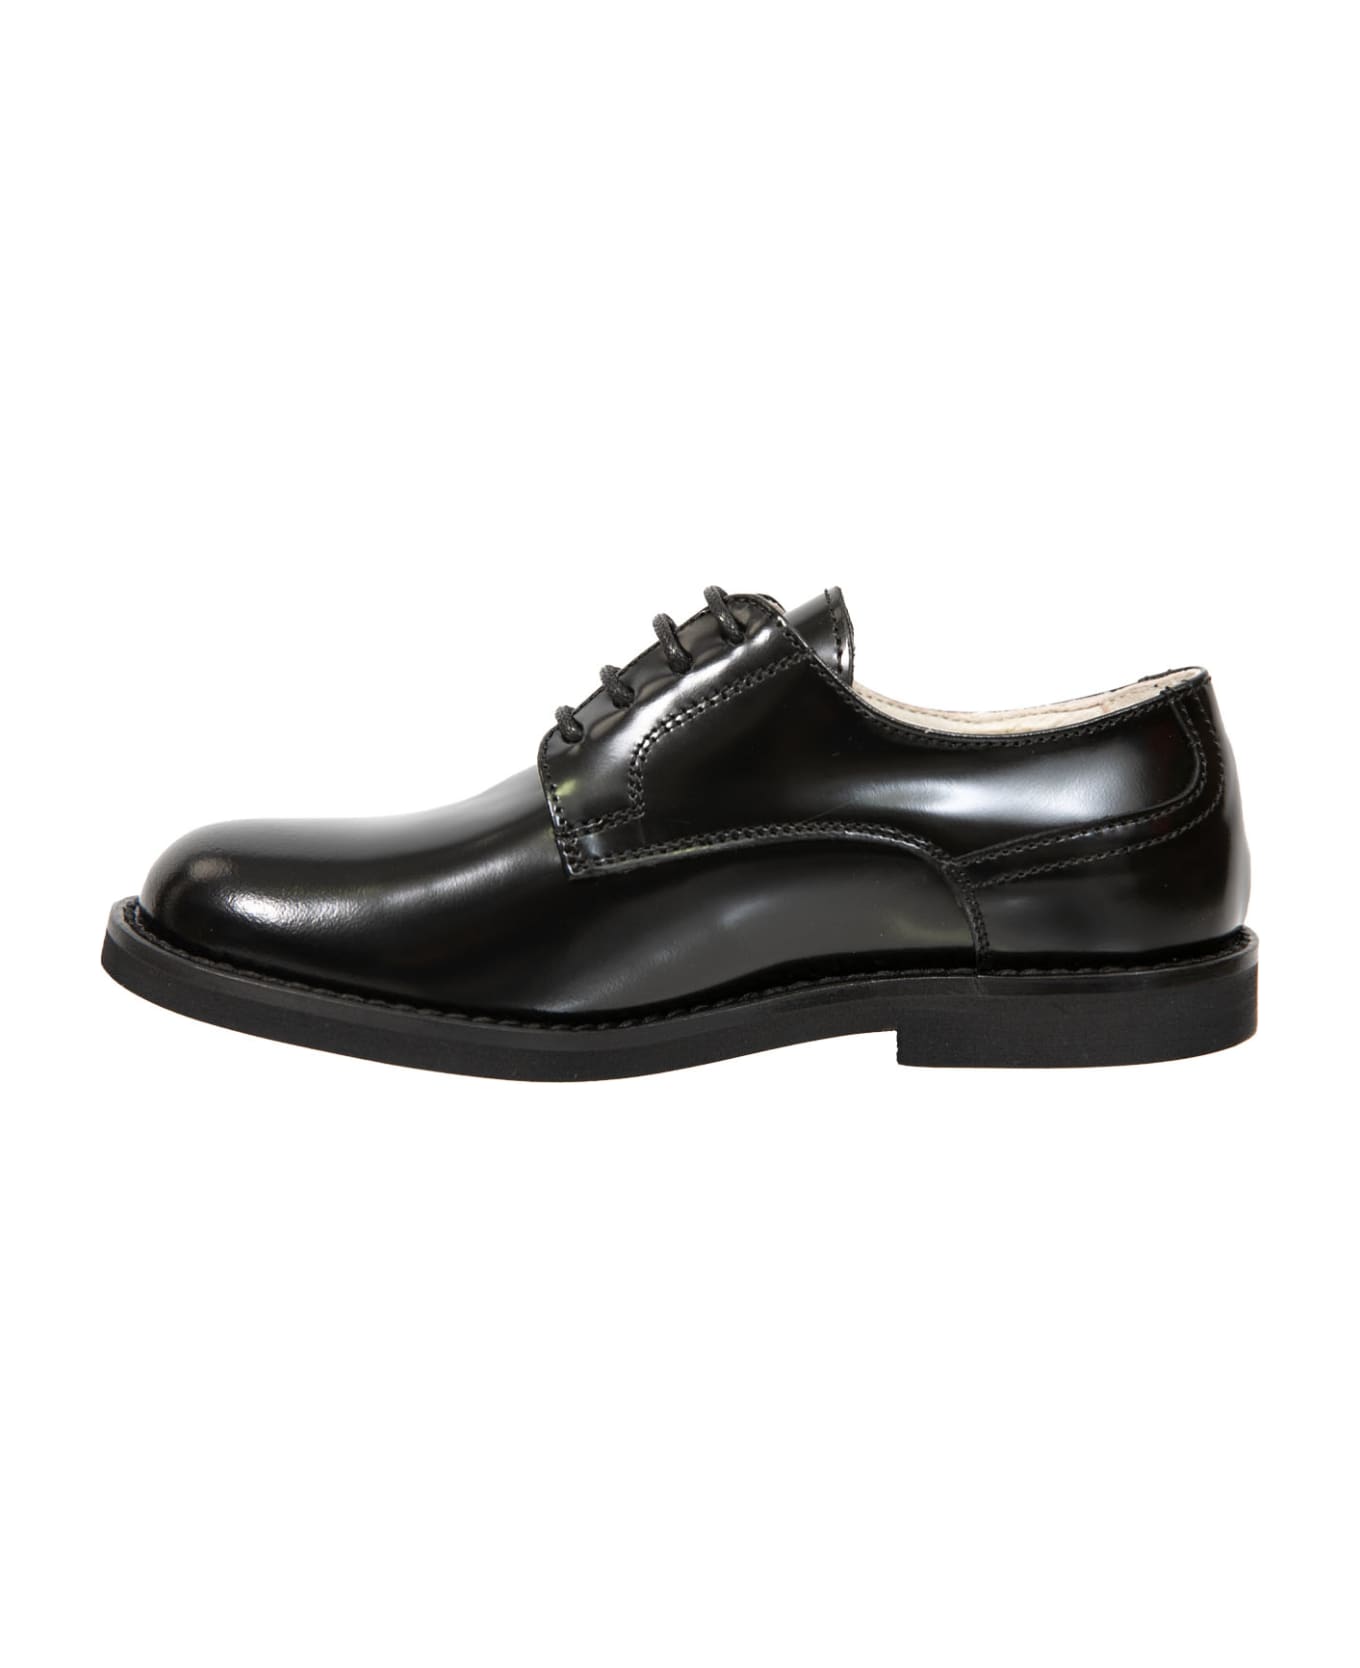 Andrea Montelpare Leather Shoes シューズ